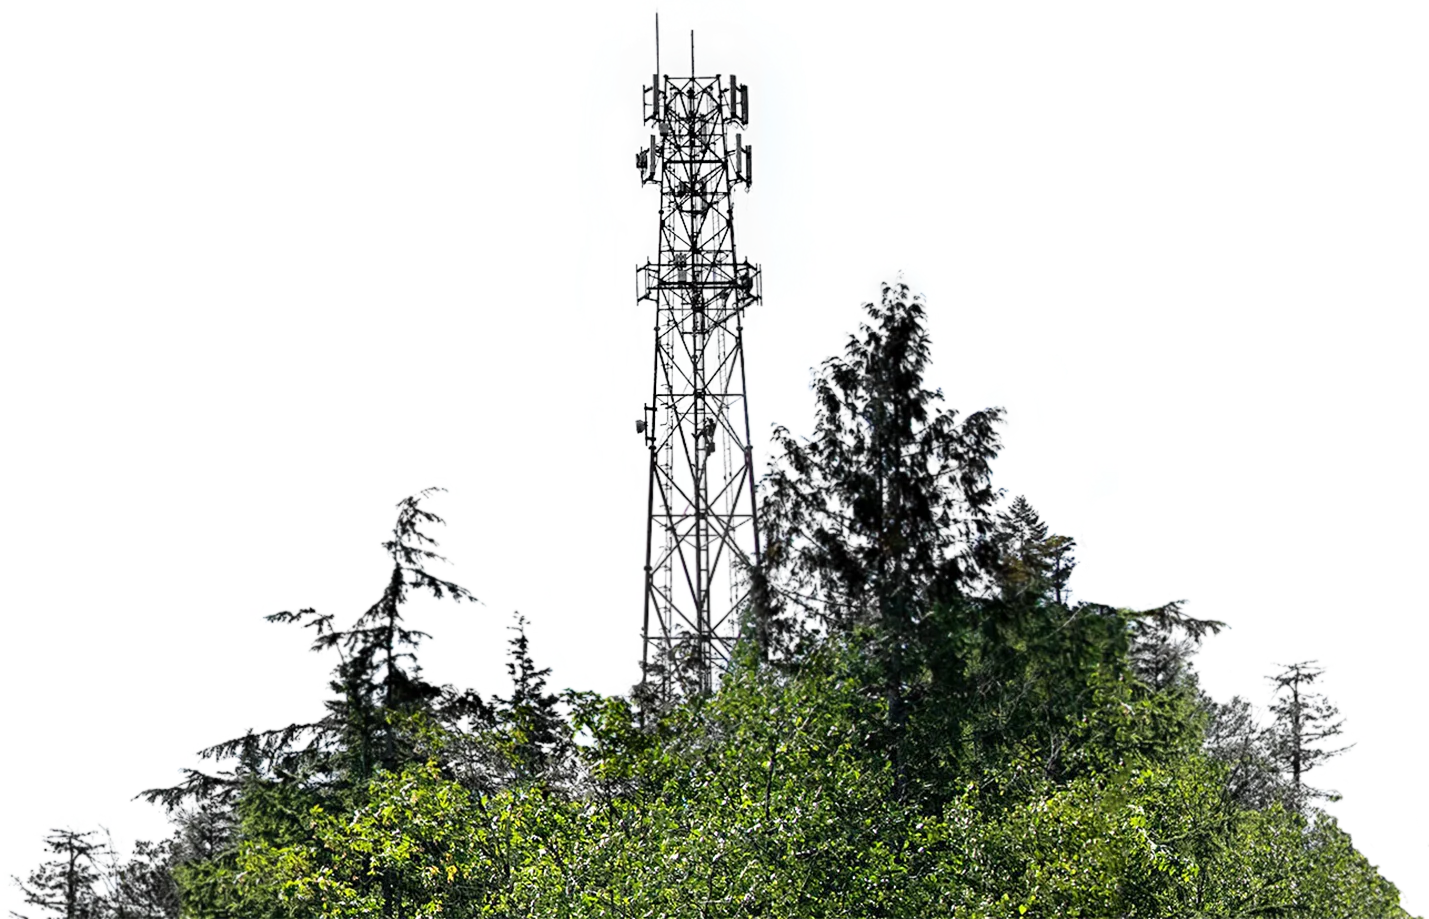 A 5G mobile cell tower